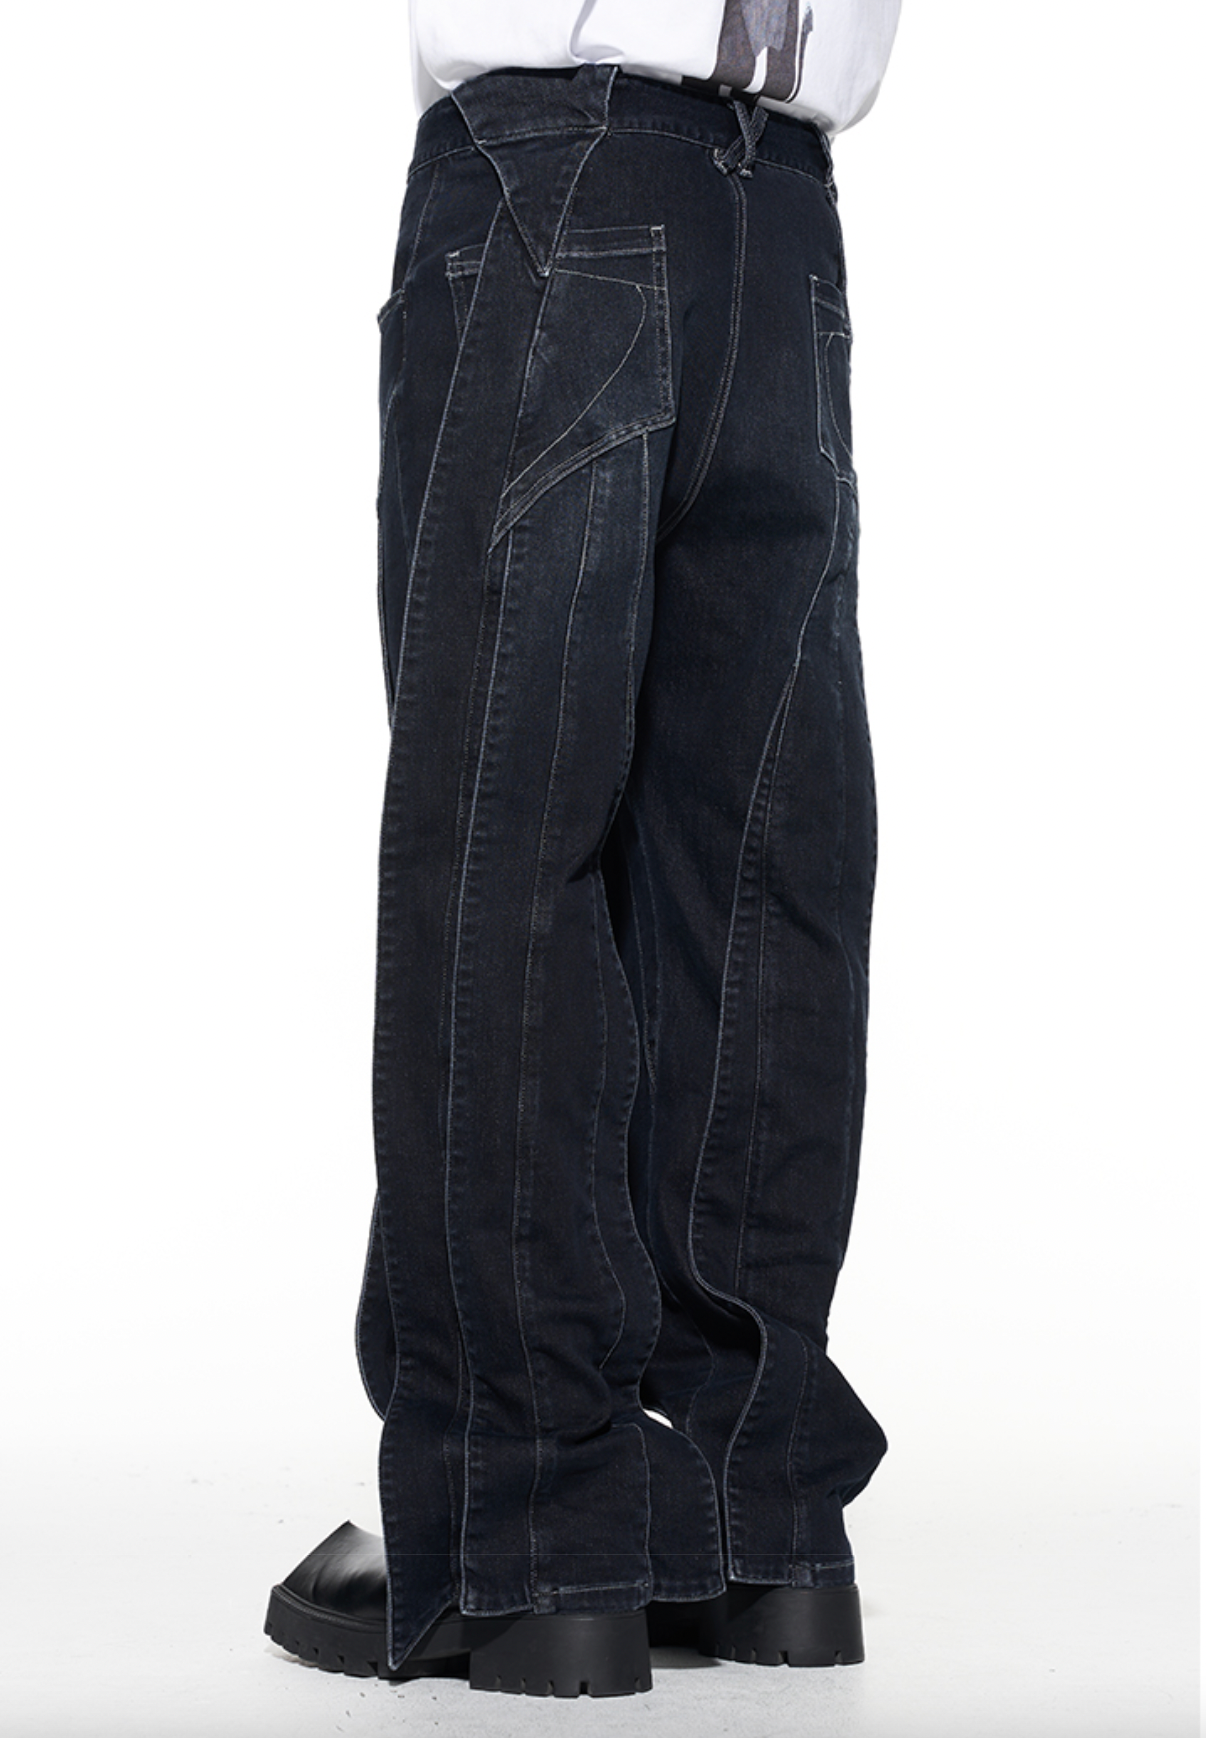 Classic Fit Selvedge Jean in Black Wash